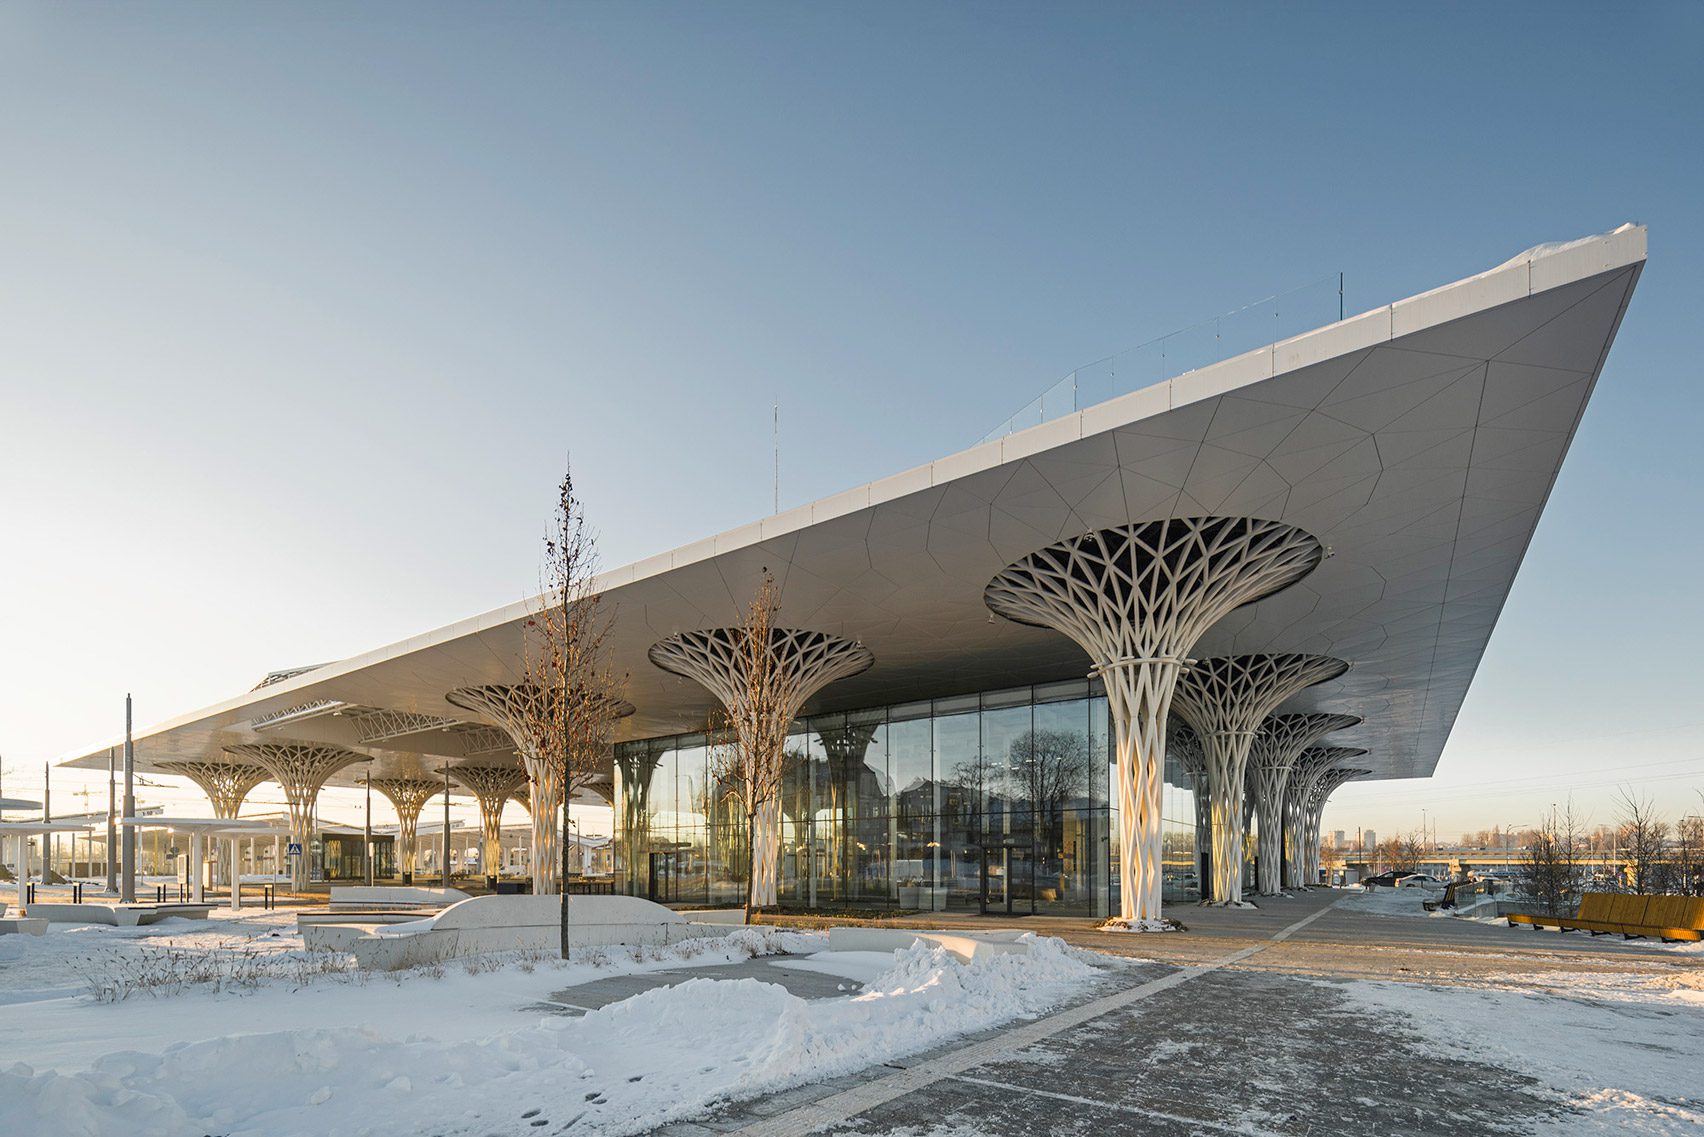 Exterior view of the Metropolitan Station in Lublin by Tremend